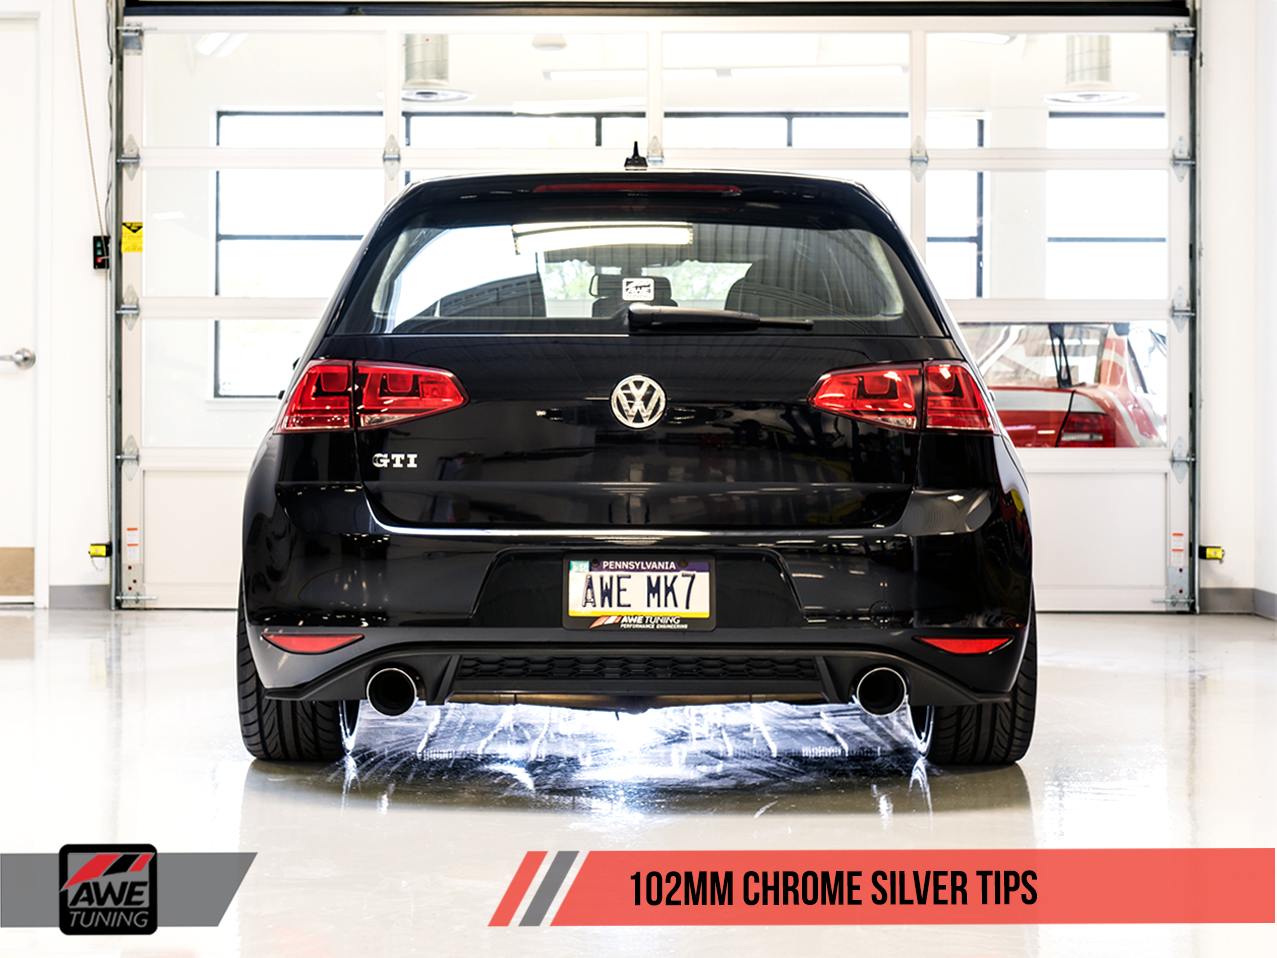 AWE Touring Edition Exhaust for VW MK7 GTI - Motorsports LA